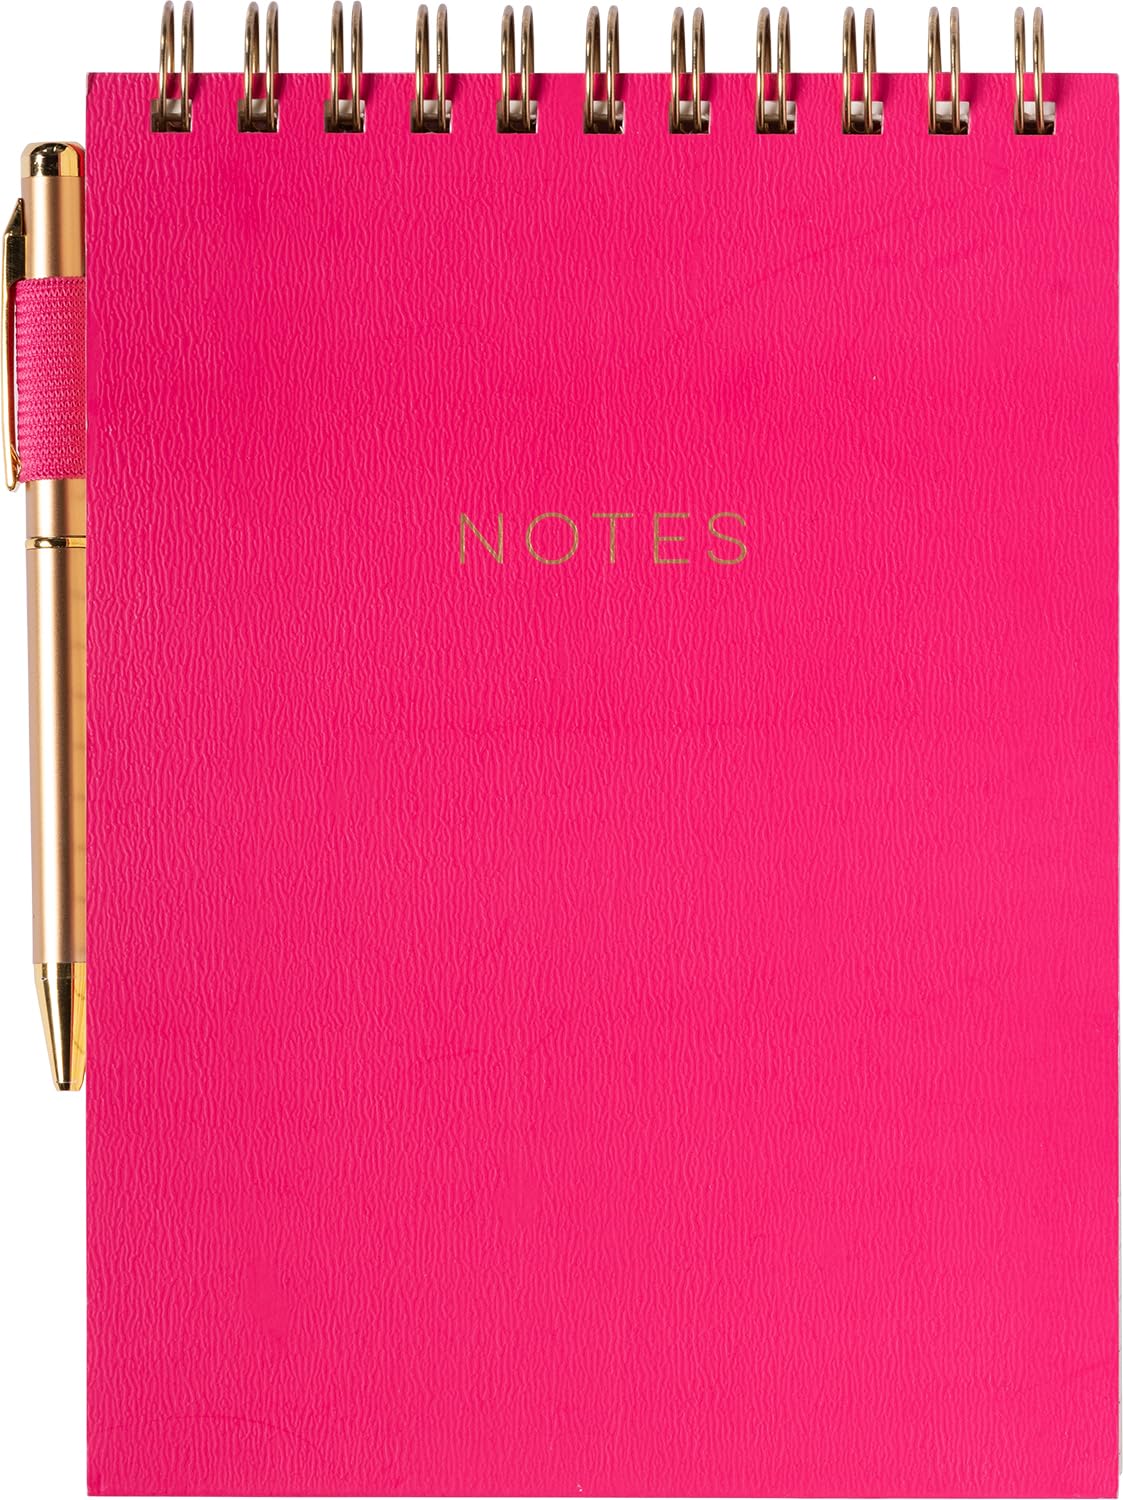 Eccolo Pink Lined Spiral Notebook with Pen Included